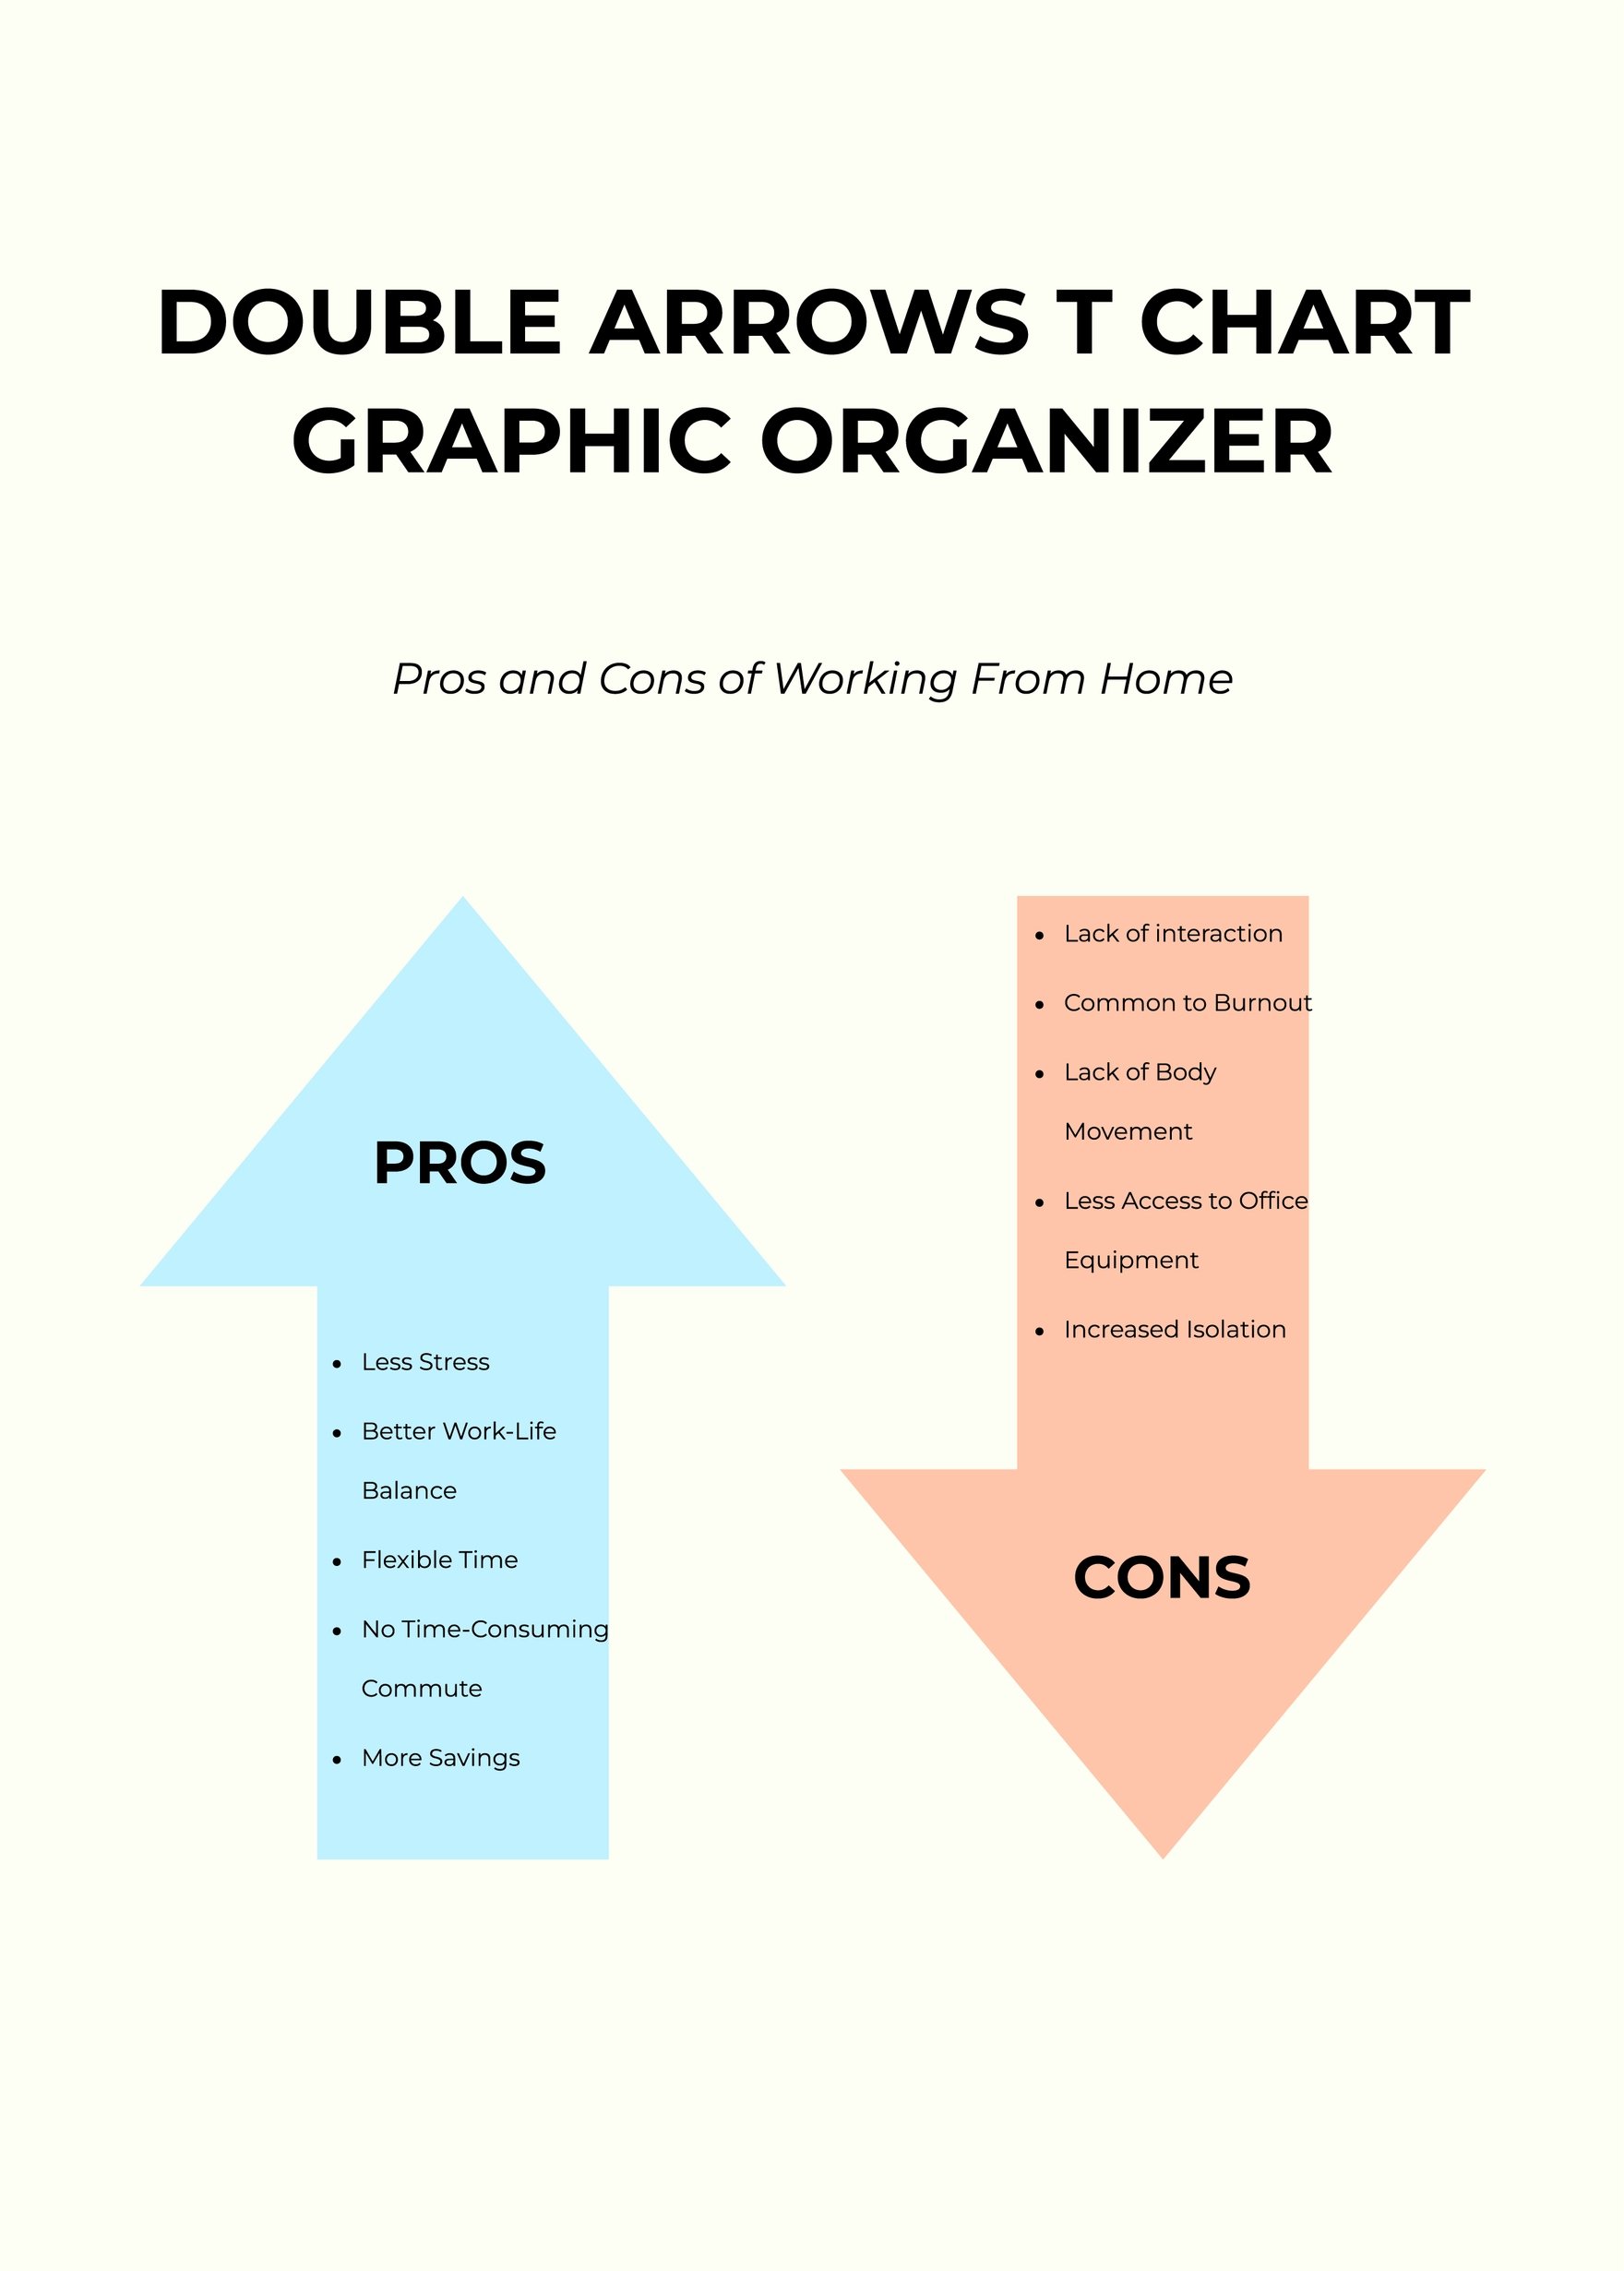 free-double-arrows-t-chart-graphic-organizer-download-in-pdf-illustrator-template